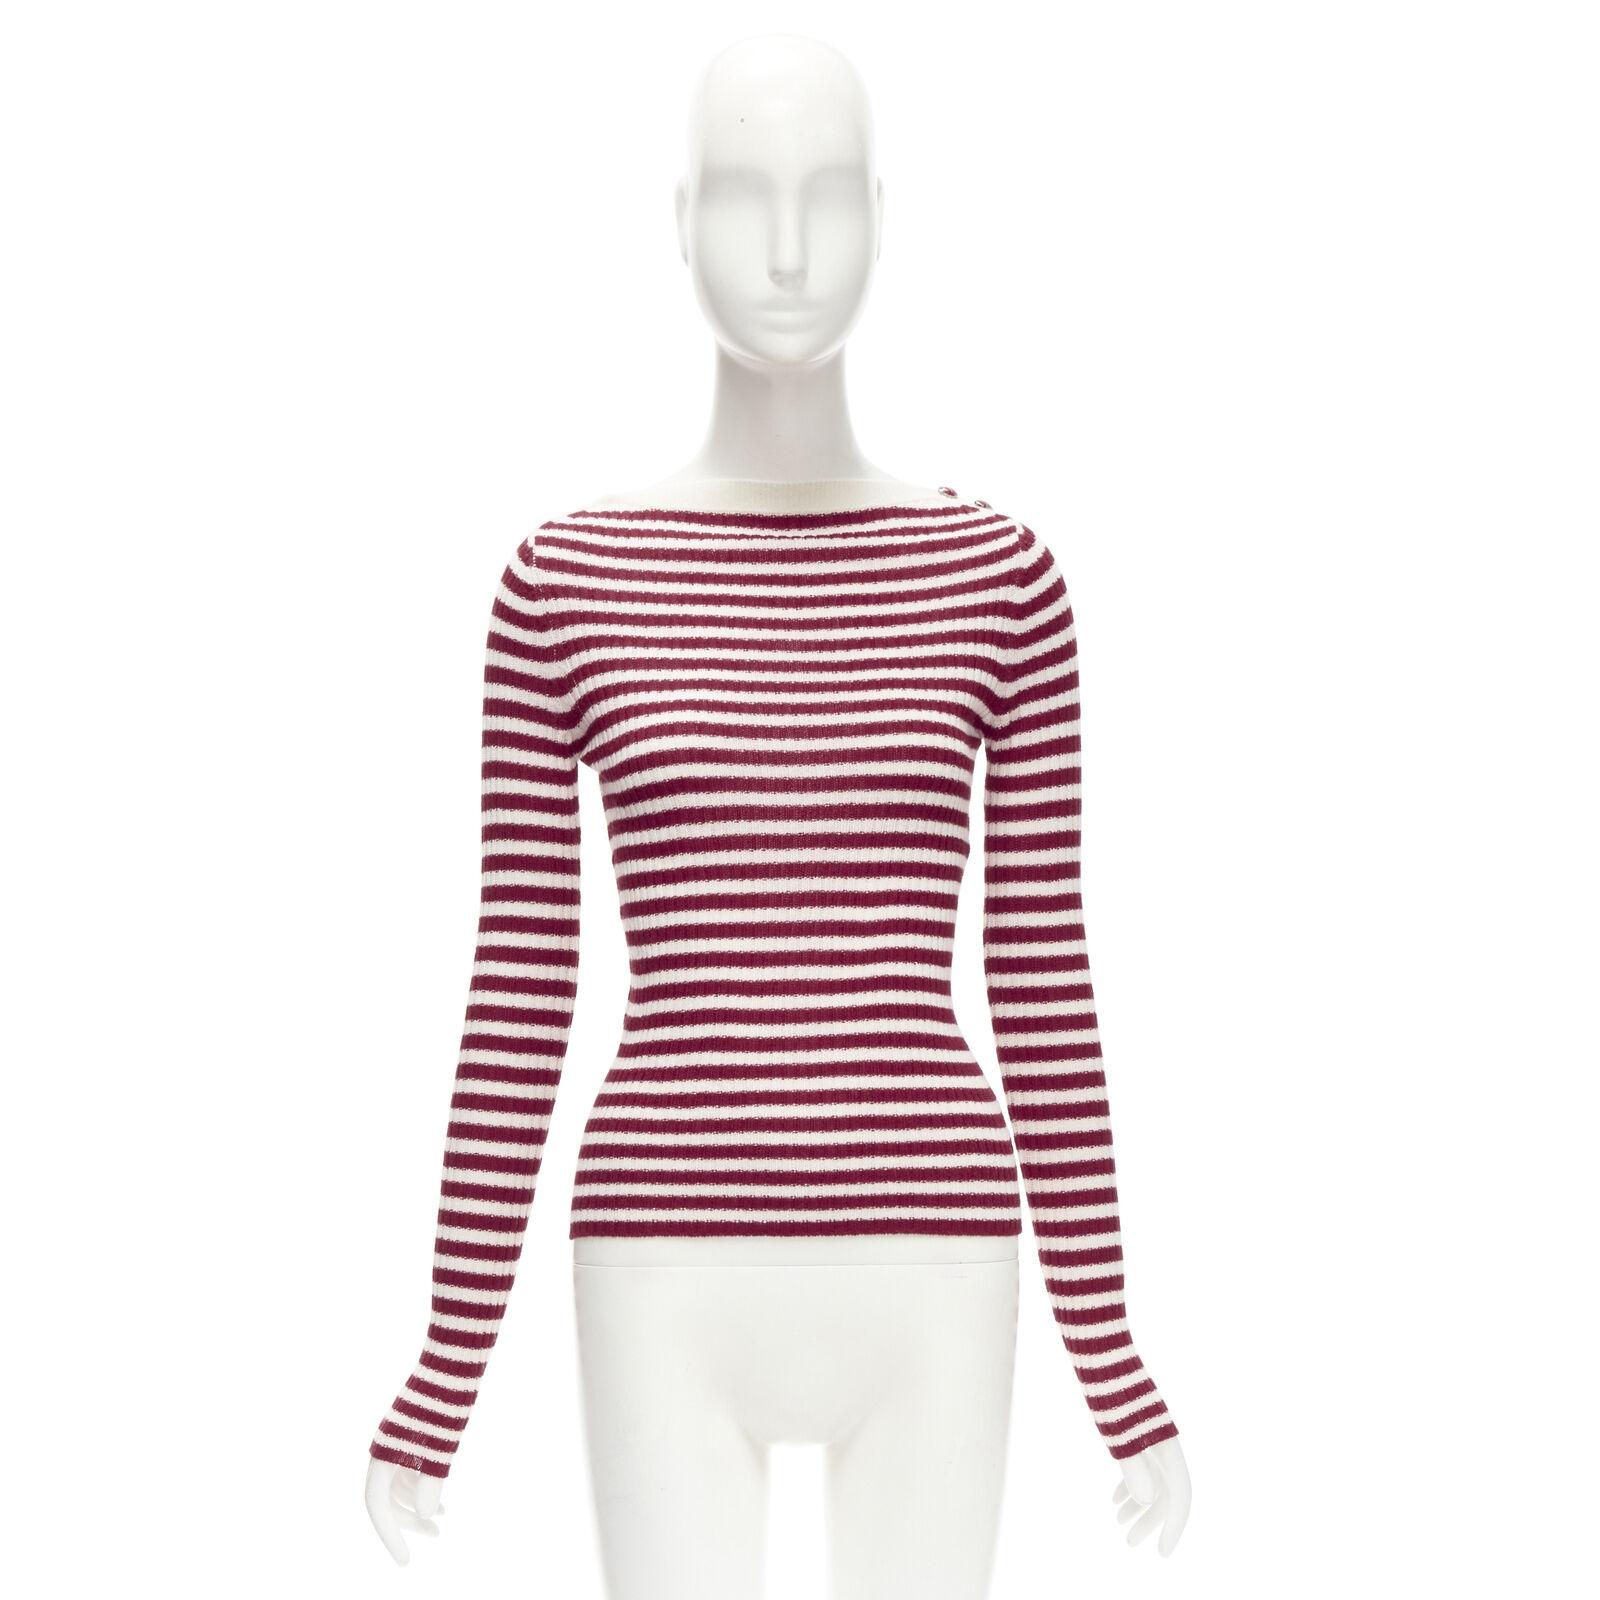 CHRISTIAN DIOR 100% cashmere white red striped boat neck CD button top FR34 XS 5